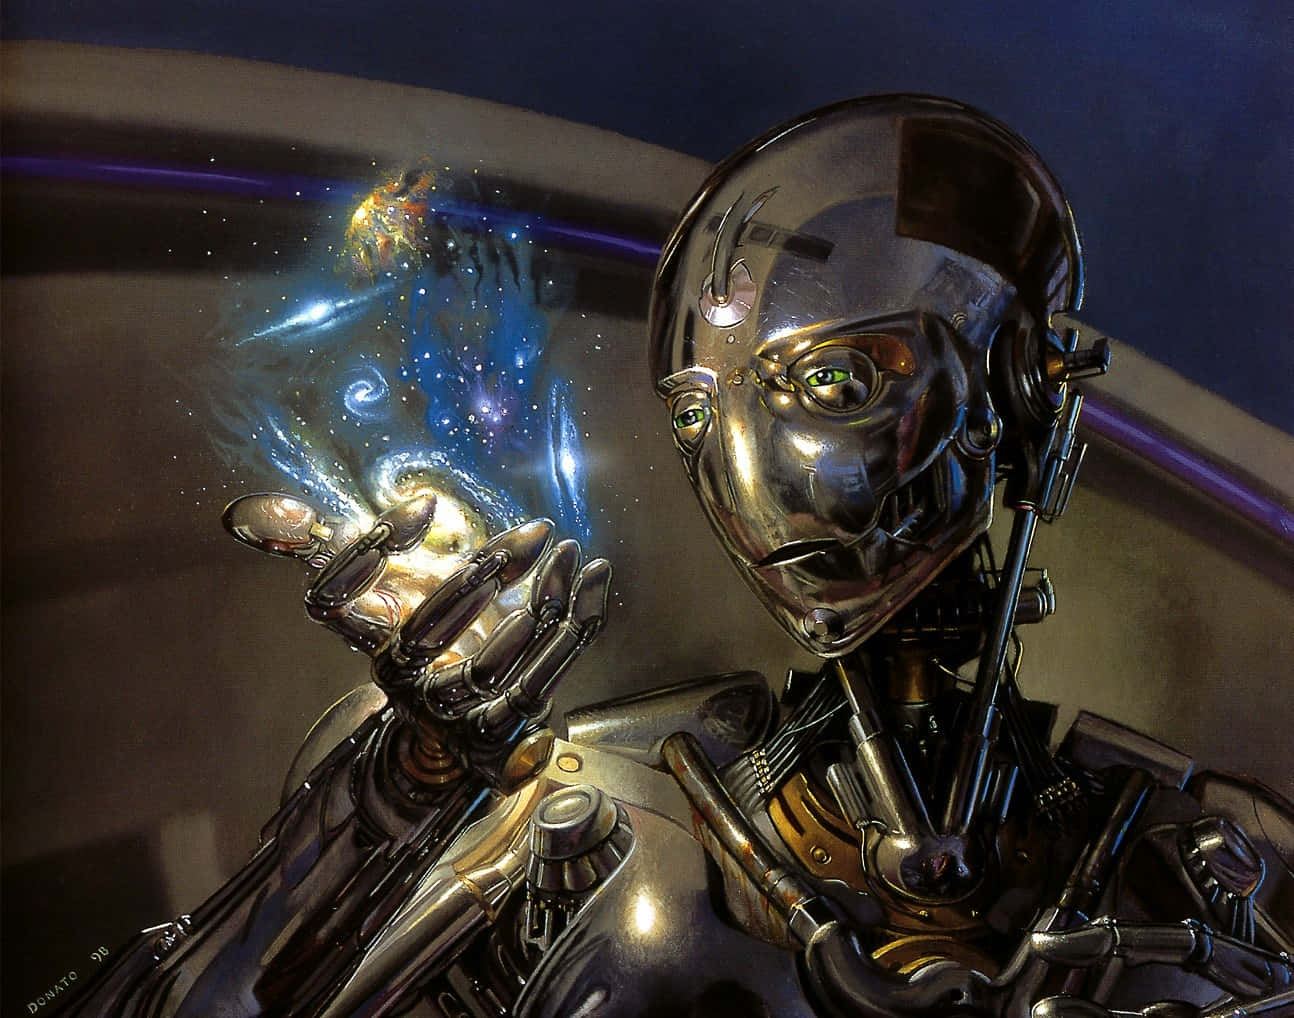 A Robot Holding A Star In Its Hand